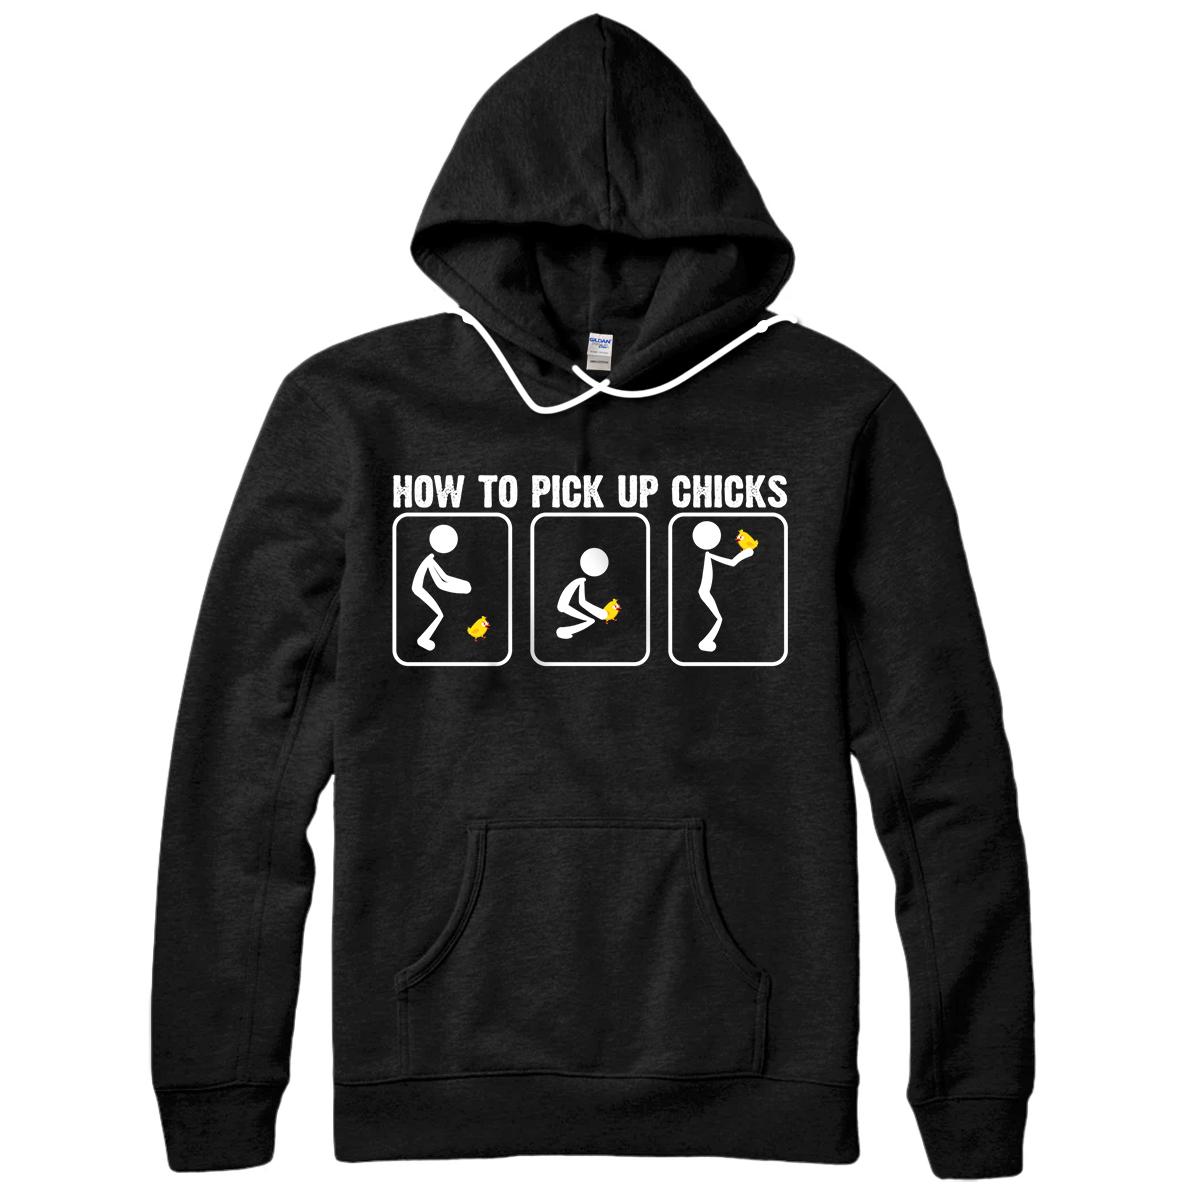 Personalized Funny How To Pick Up Chicks Gift For Men Cool Chicken Jokes Pullover Hoodie